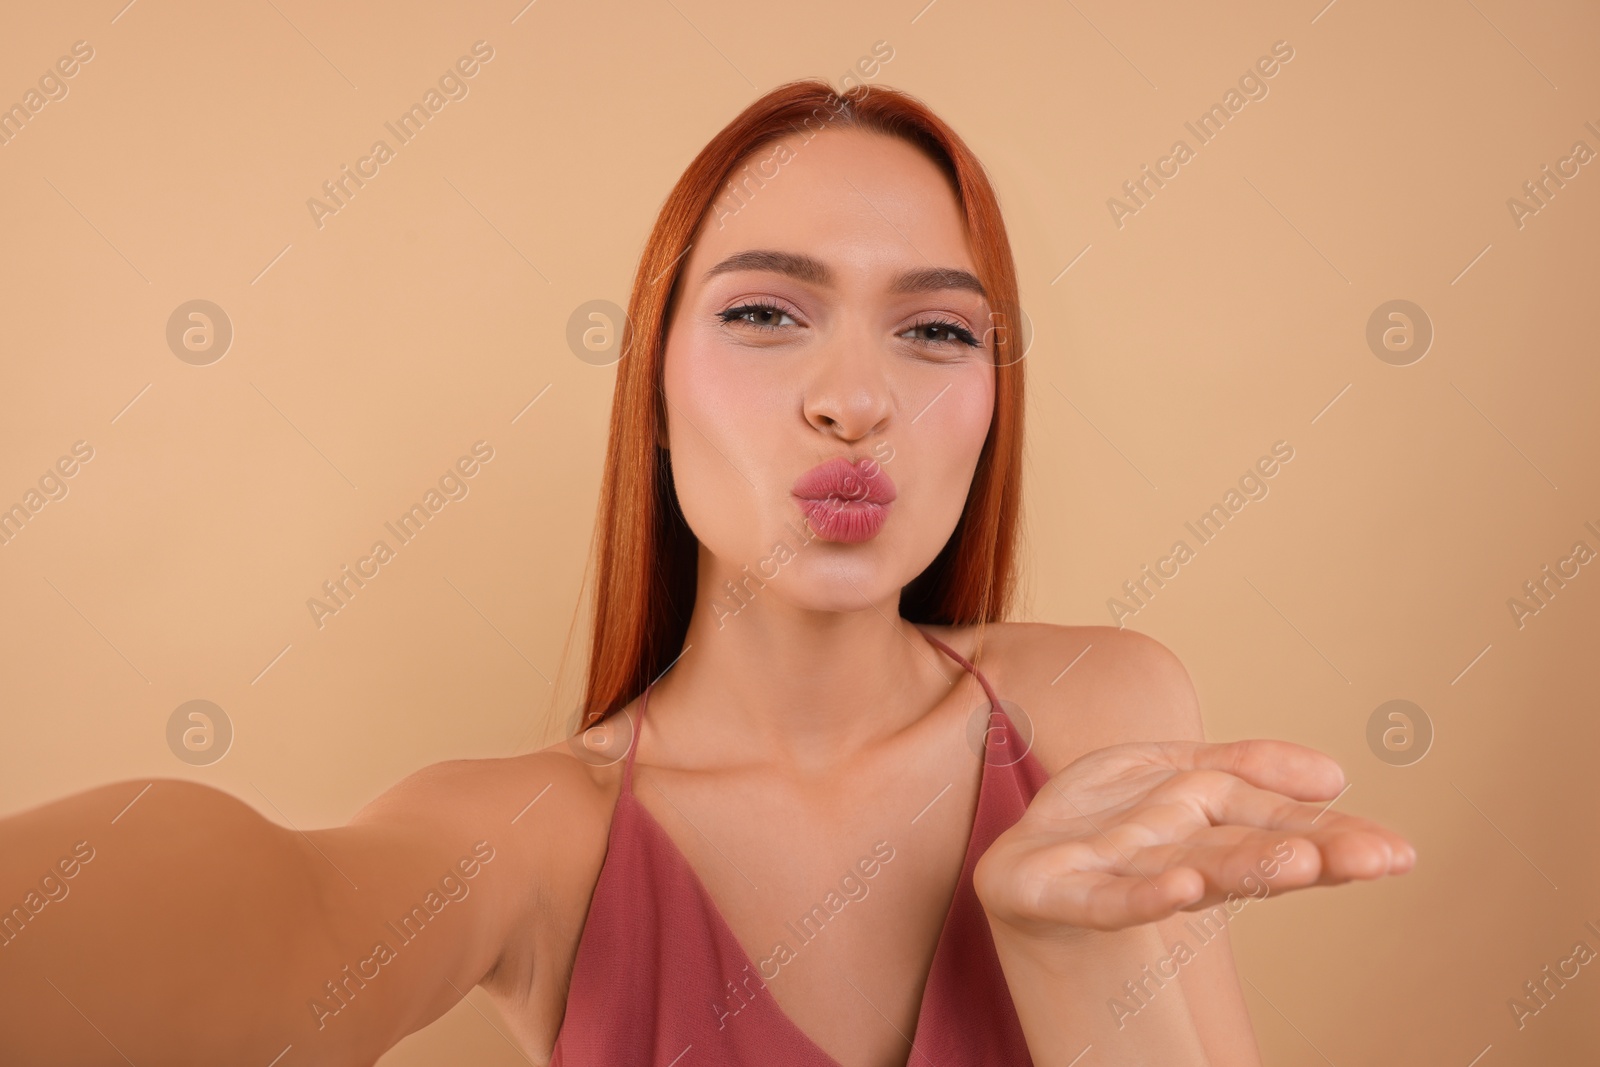 Photo of Beautiful woman taking selfie and blowing kiss on beige background